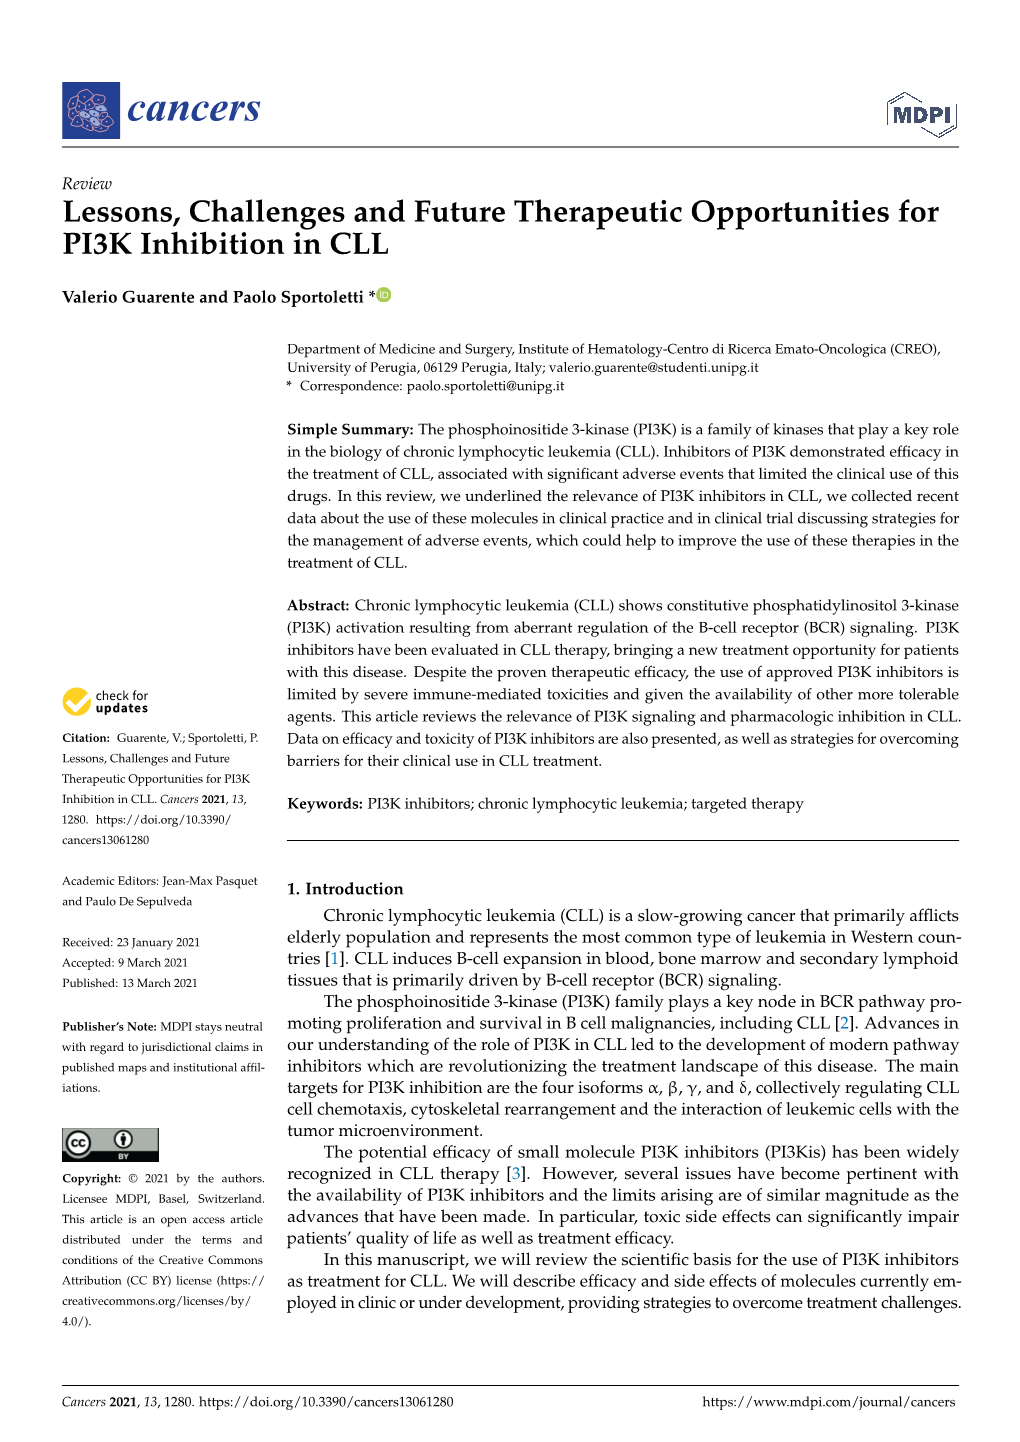 Lessons, Challenges and Future Therapeutic Opportunities for PI3K Inhibition in CLL